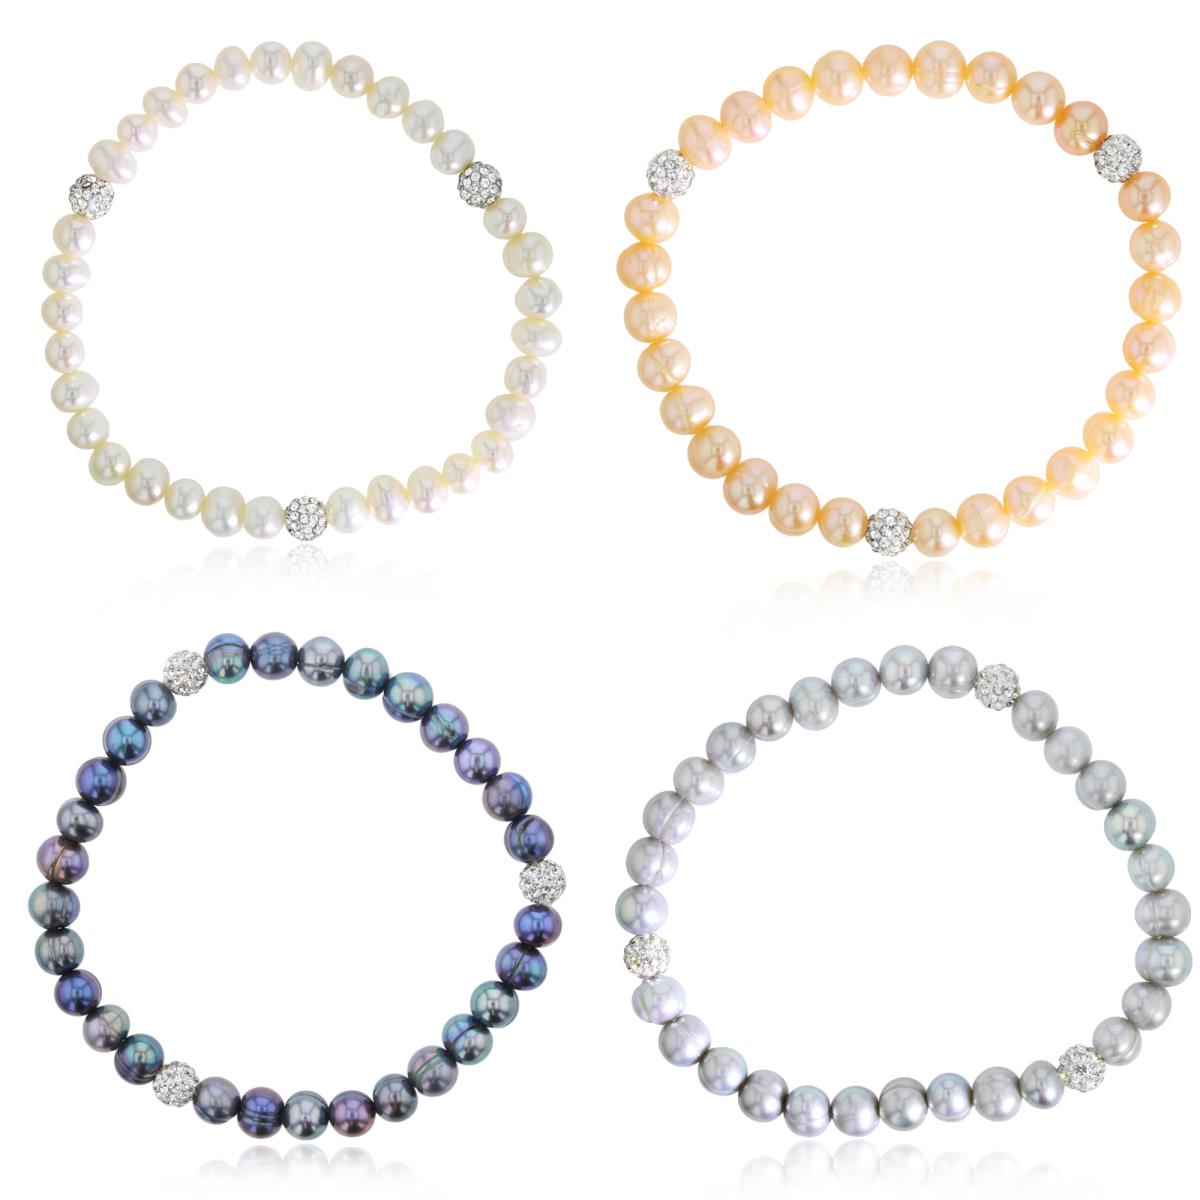 6-7mm Near Round White/Pink/ Gray/ Black Fresh Water Pearls & Crystal Ball Stretchy Bracelets Set of 4